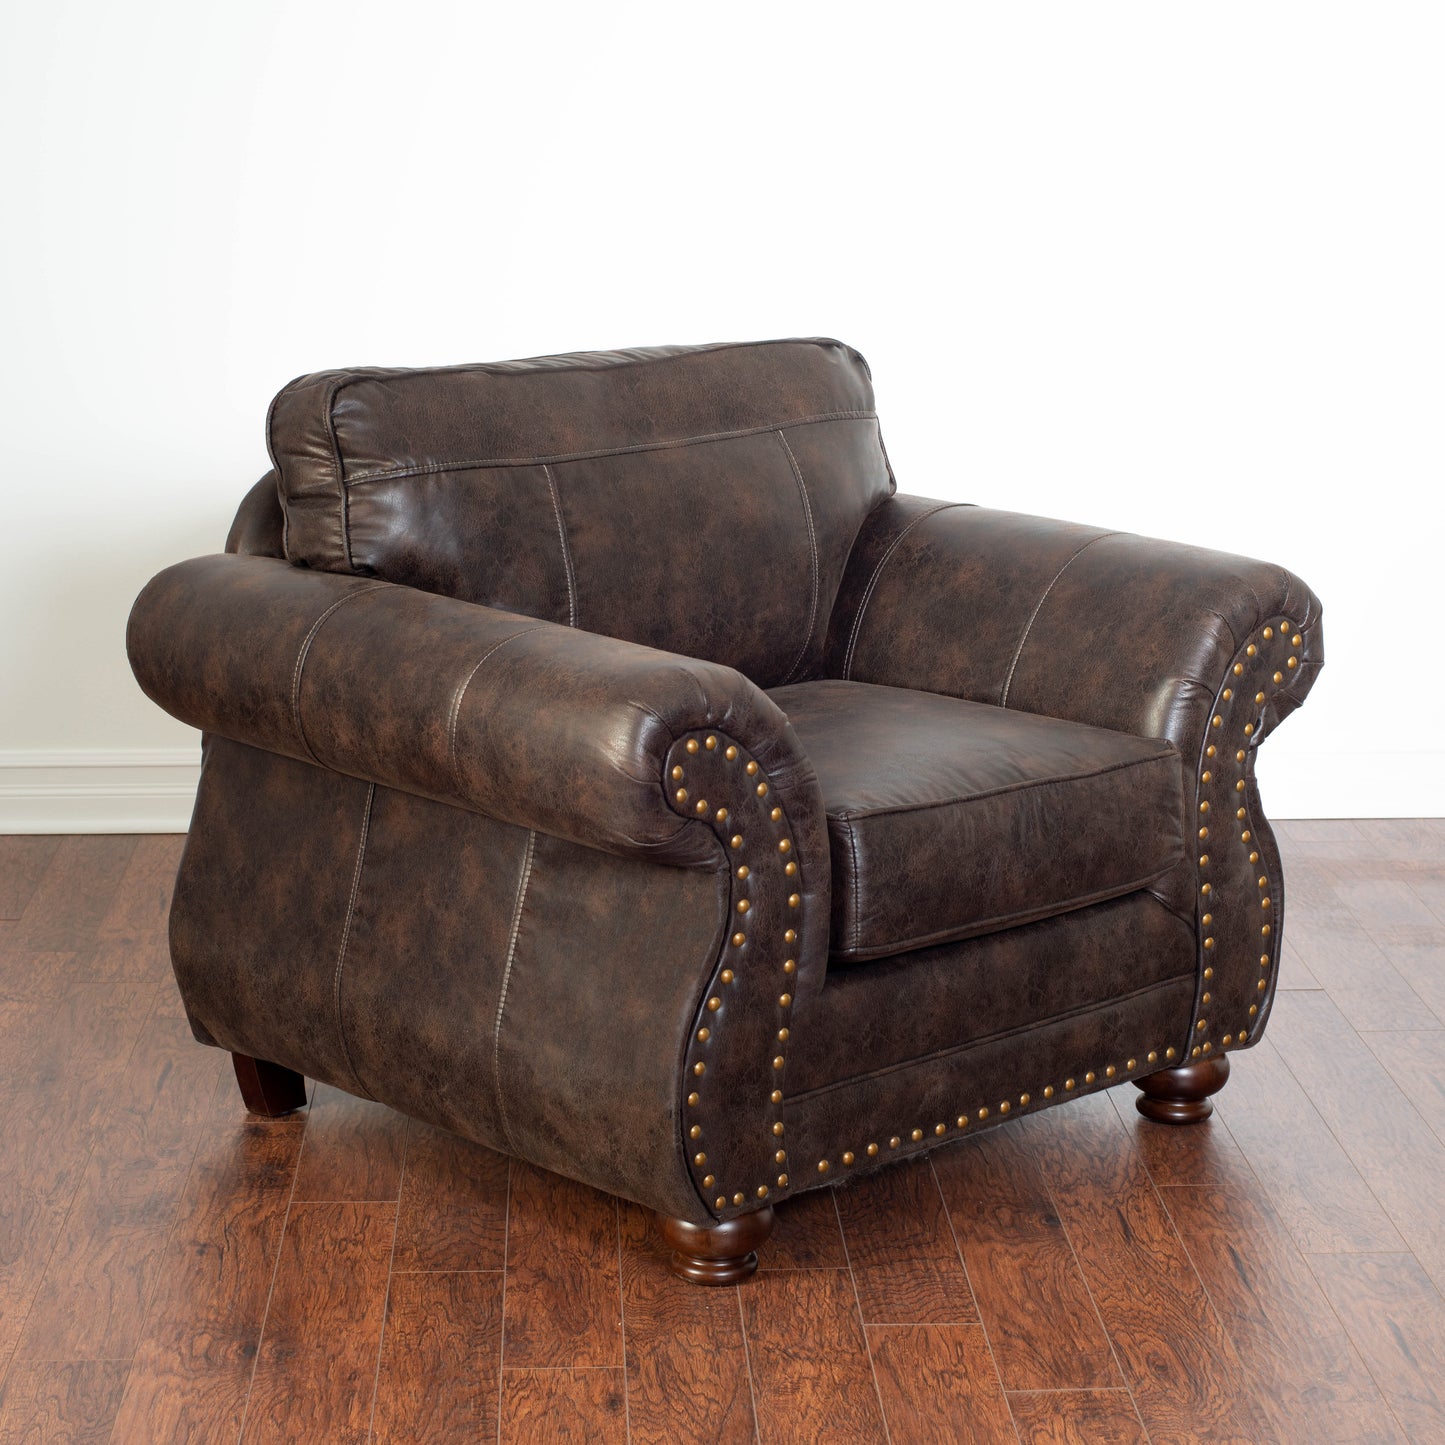 Leinster Faux Leather Upholstered Nailhead Chair and Ottoman in Espresso